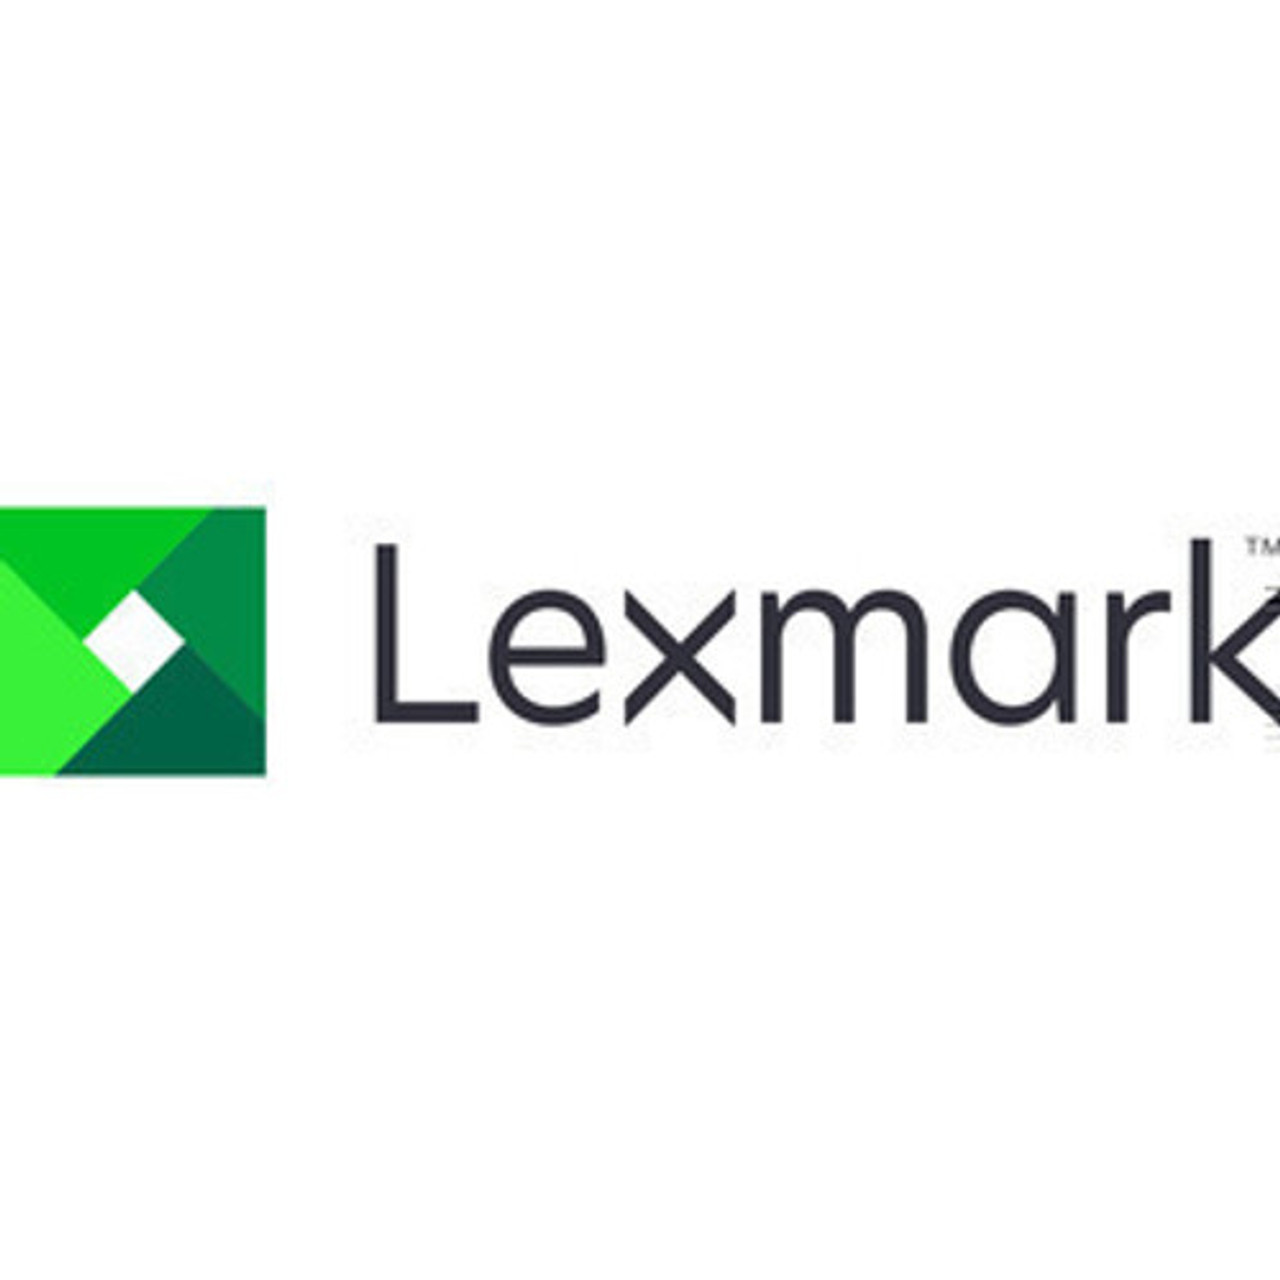 Lexmark Signature button contact assembly cable - 40X0034